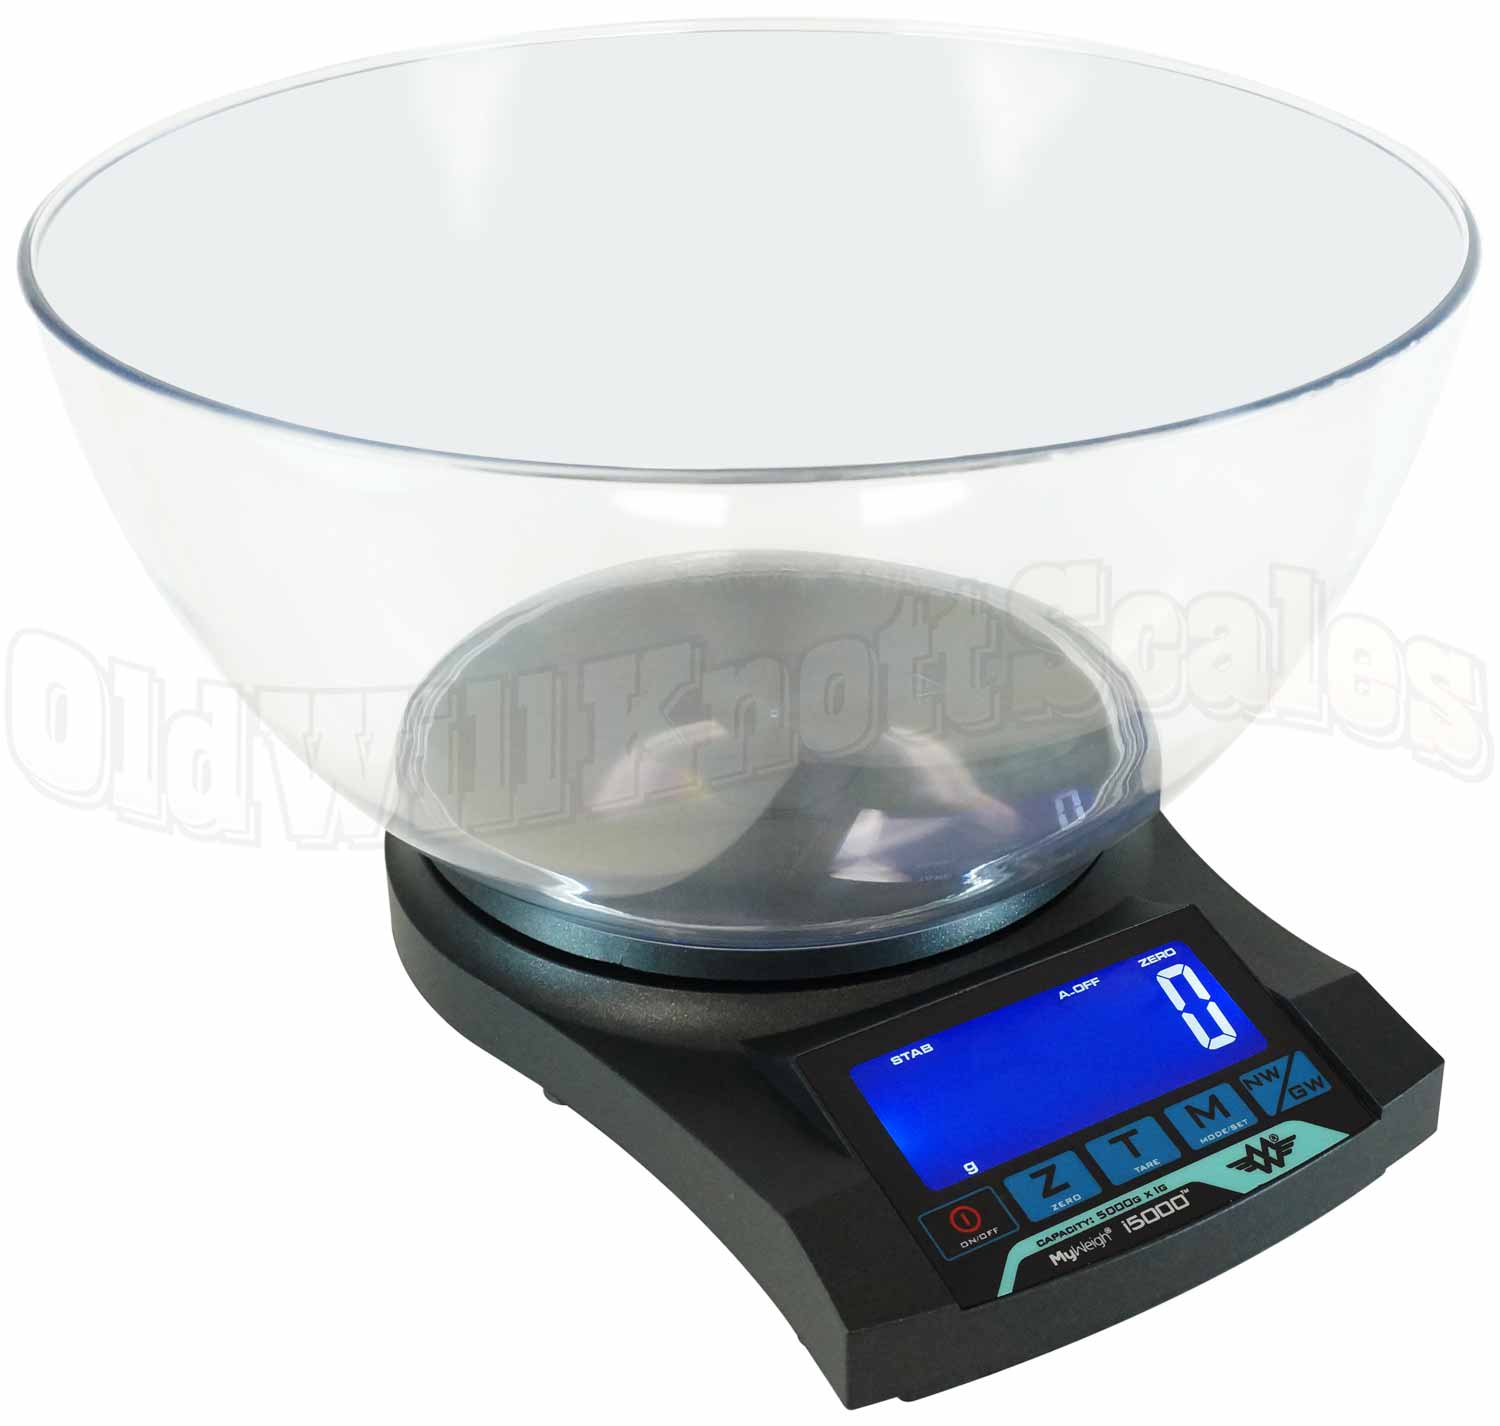 http://www.oldwillknottscales.com/assets/images/myweigh/i5000-with-bowl-large.jpg